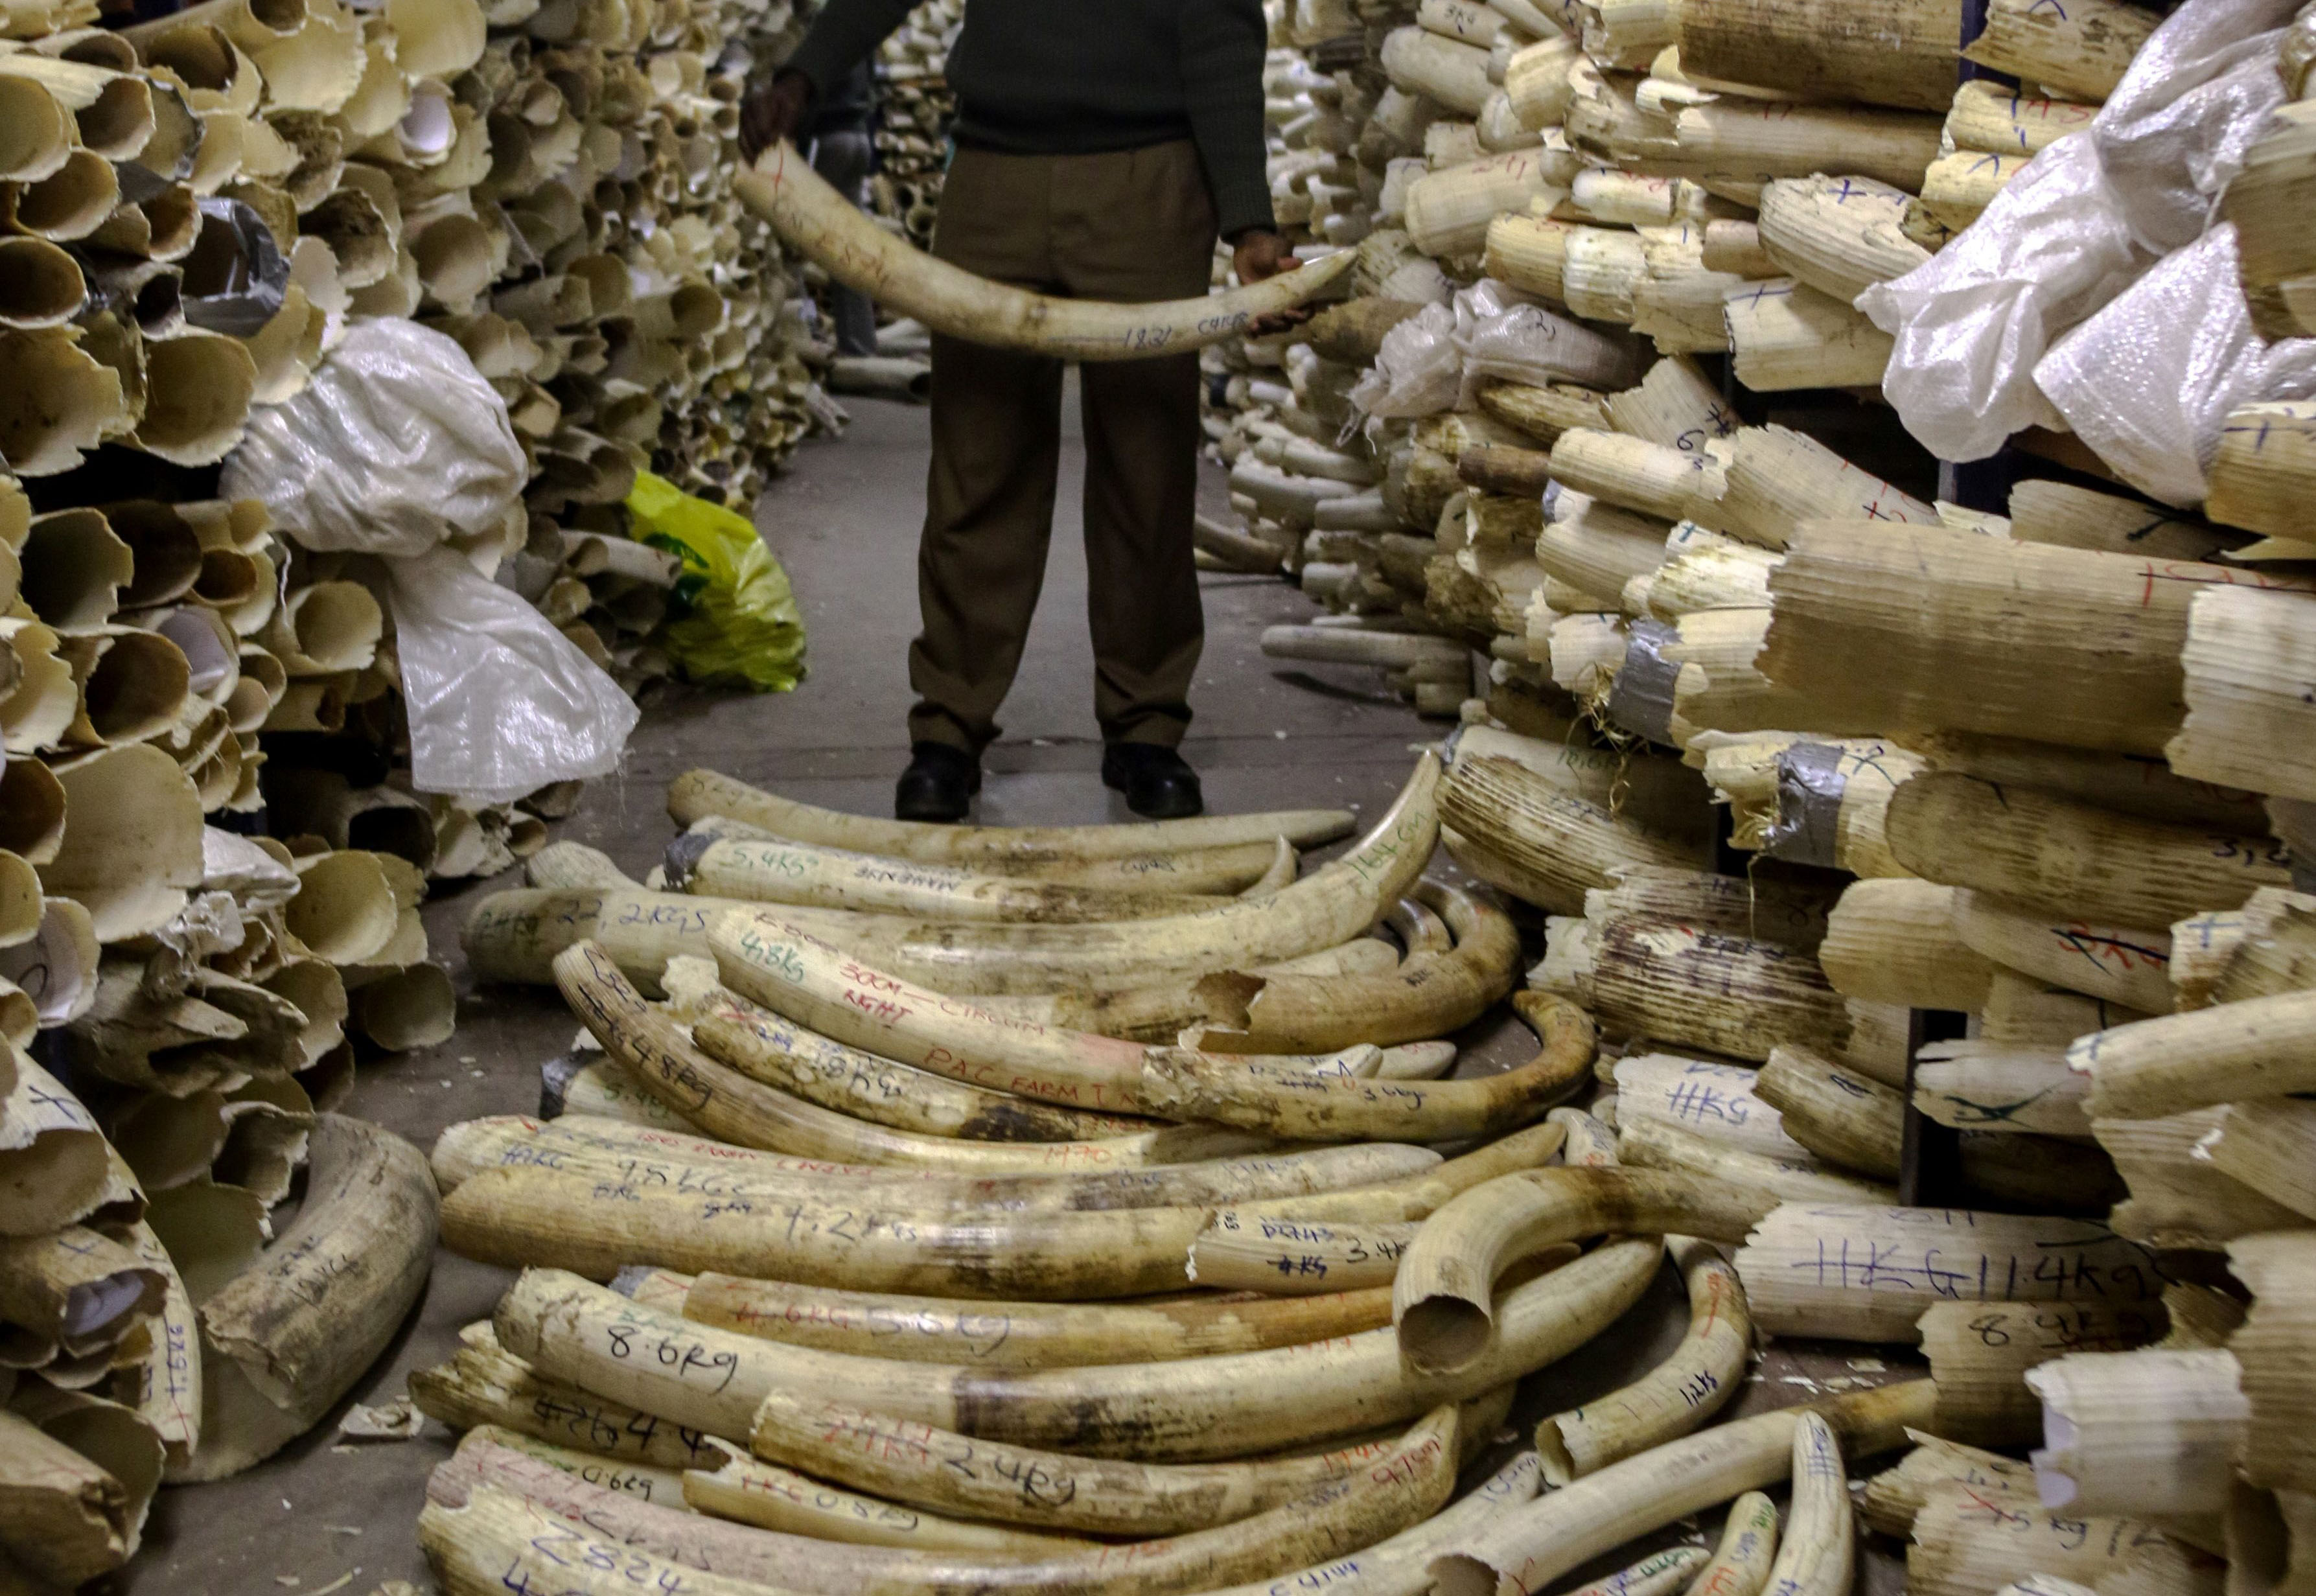 Zimbabwe Wants to Sell Ivory Stockpile, May Withdraw From CITES - Bloomberg